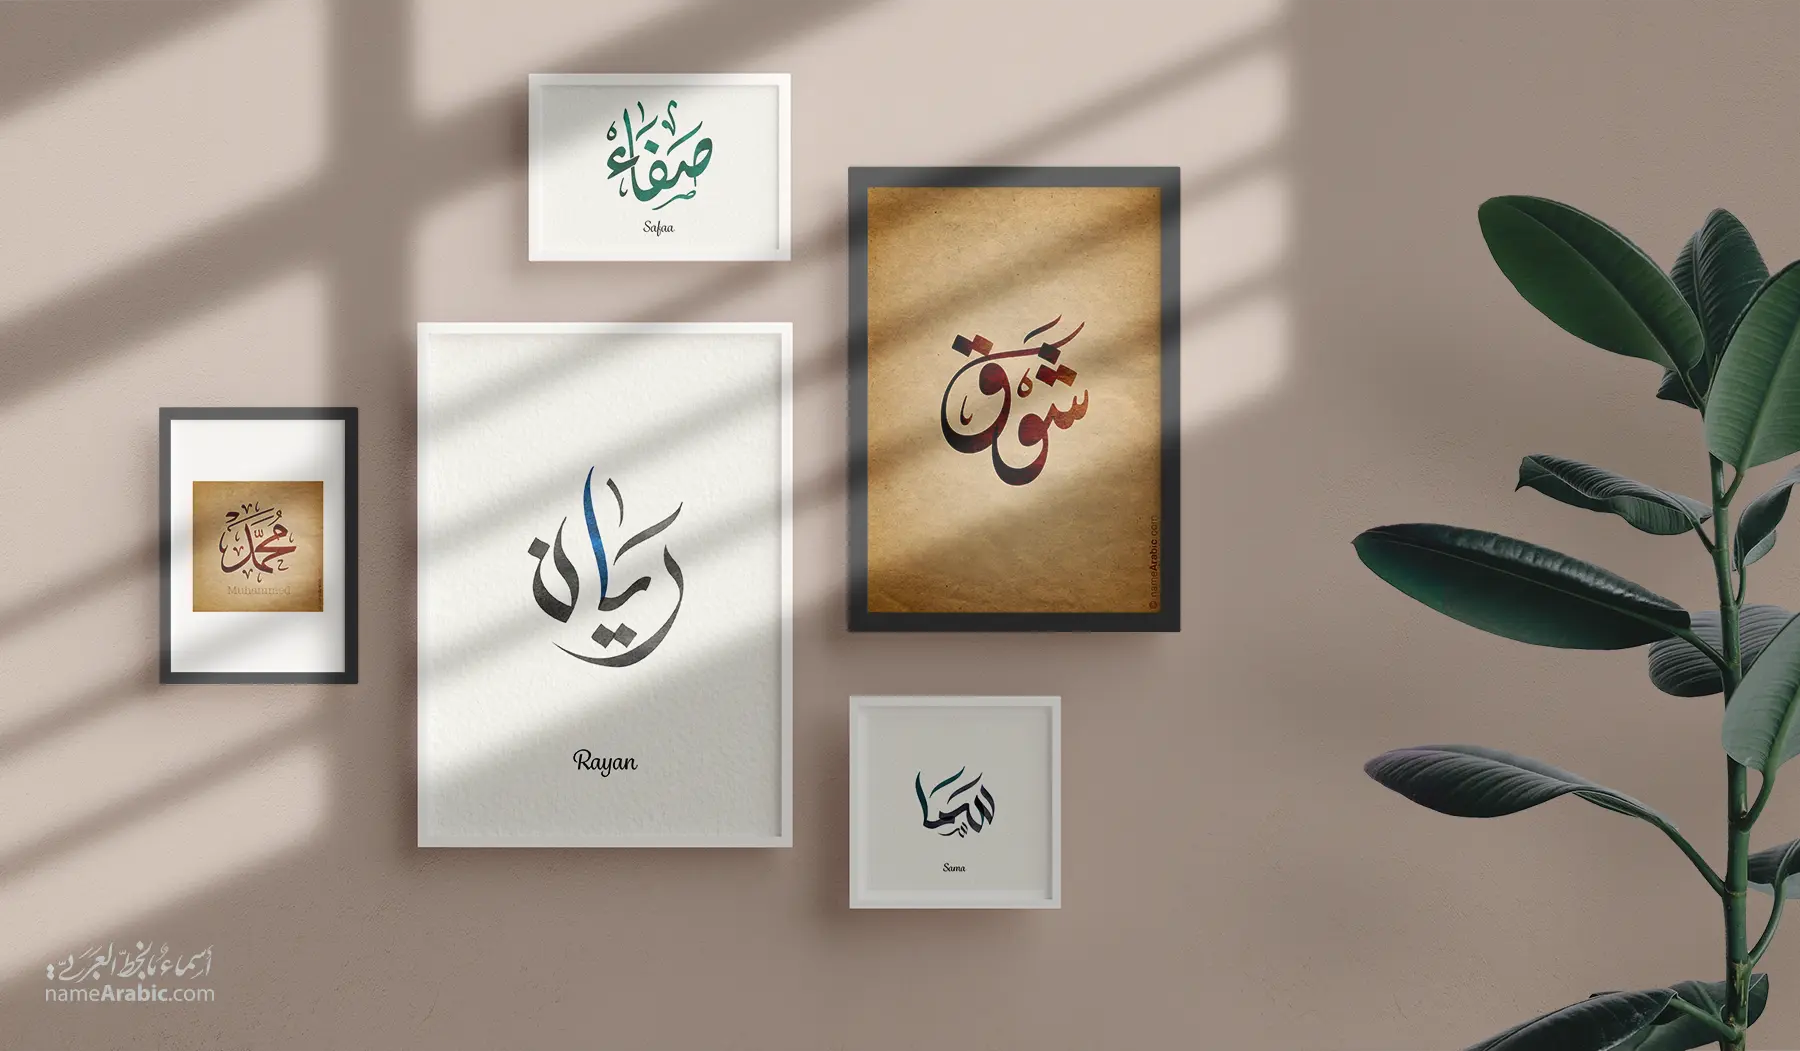 Request your name with Arabic Calligraphy, Arabic names design